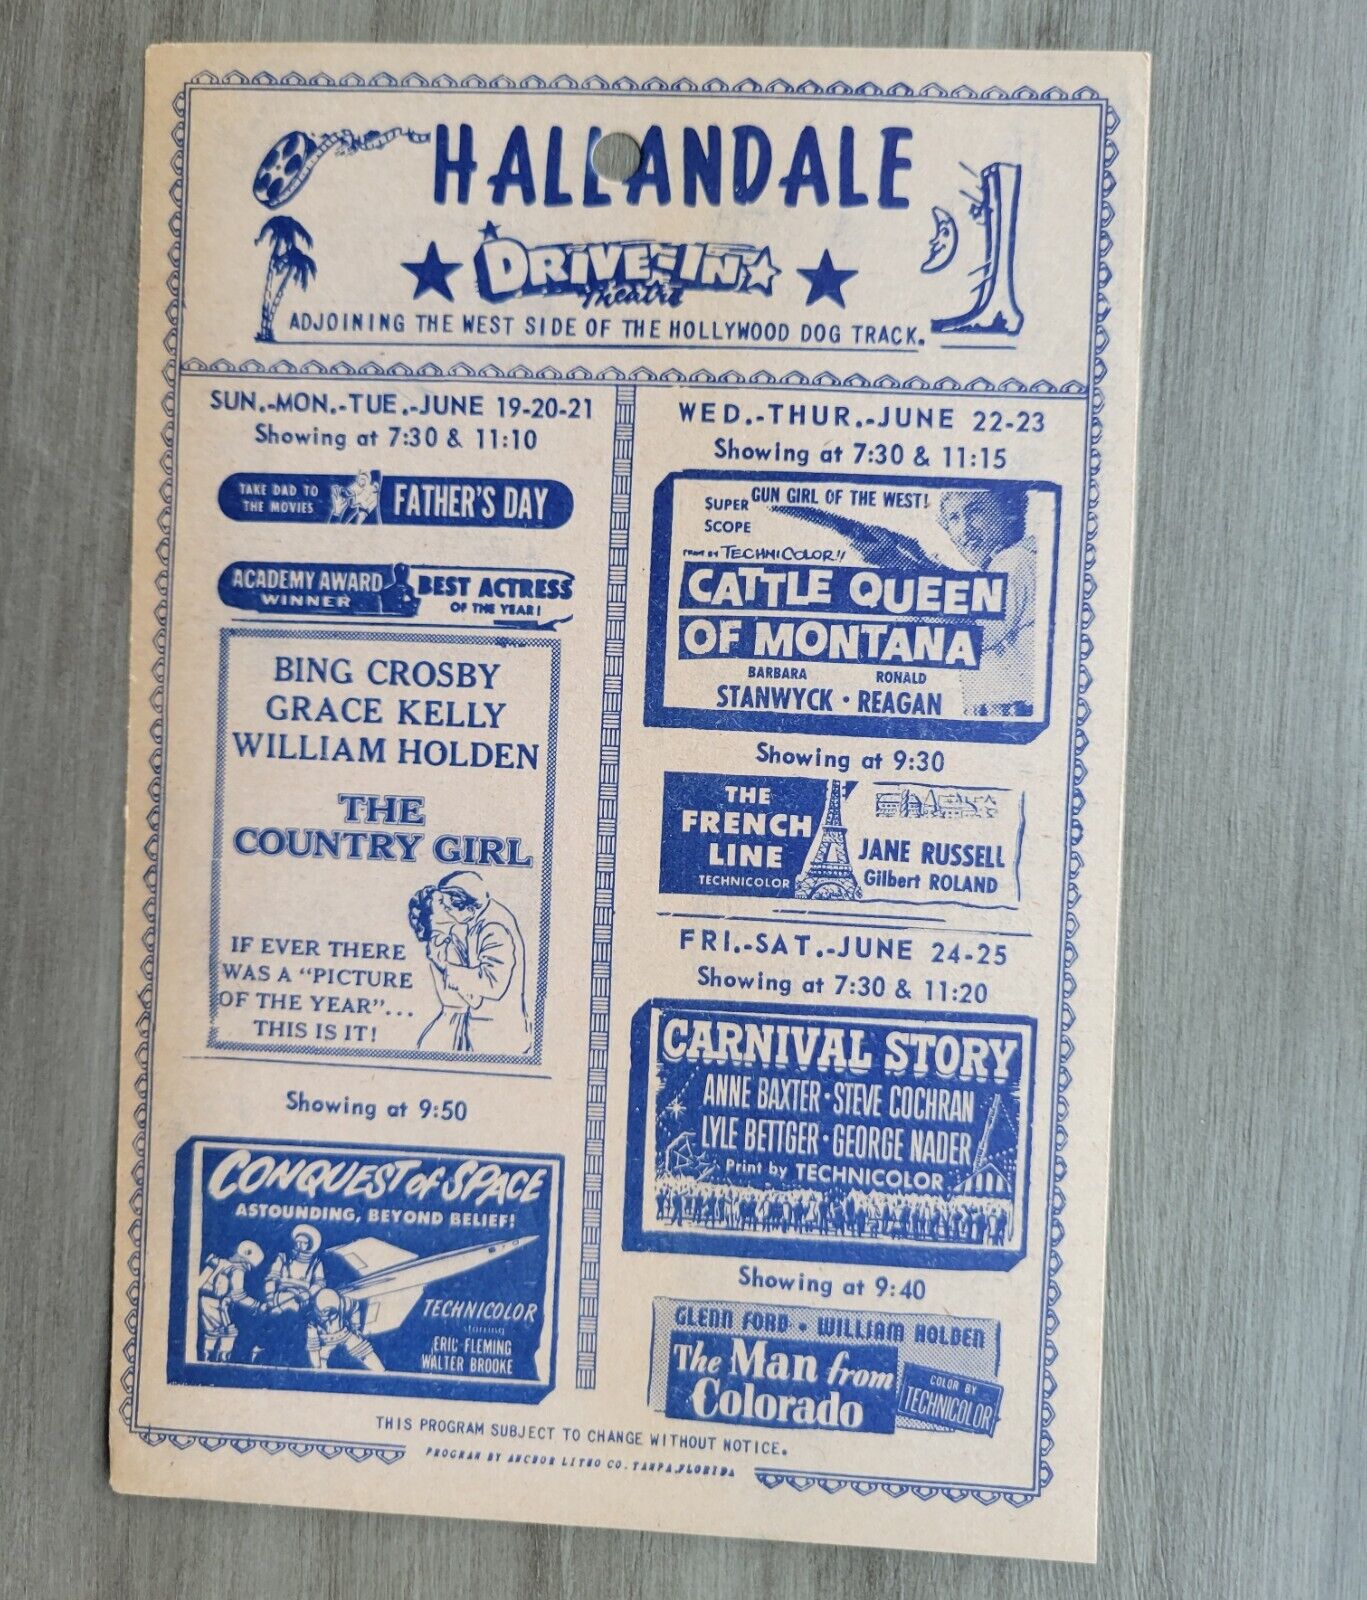 Hallandale and Hi-Way Drive-In Theatre Brochure June 1955 The Prodigal